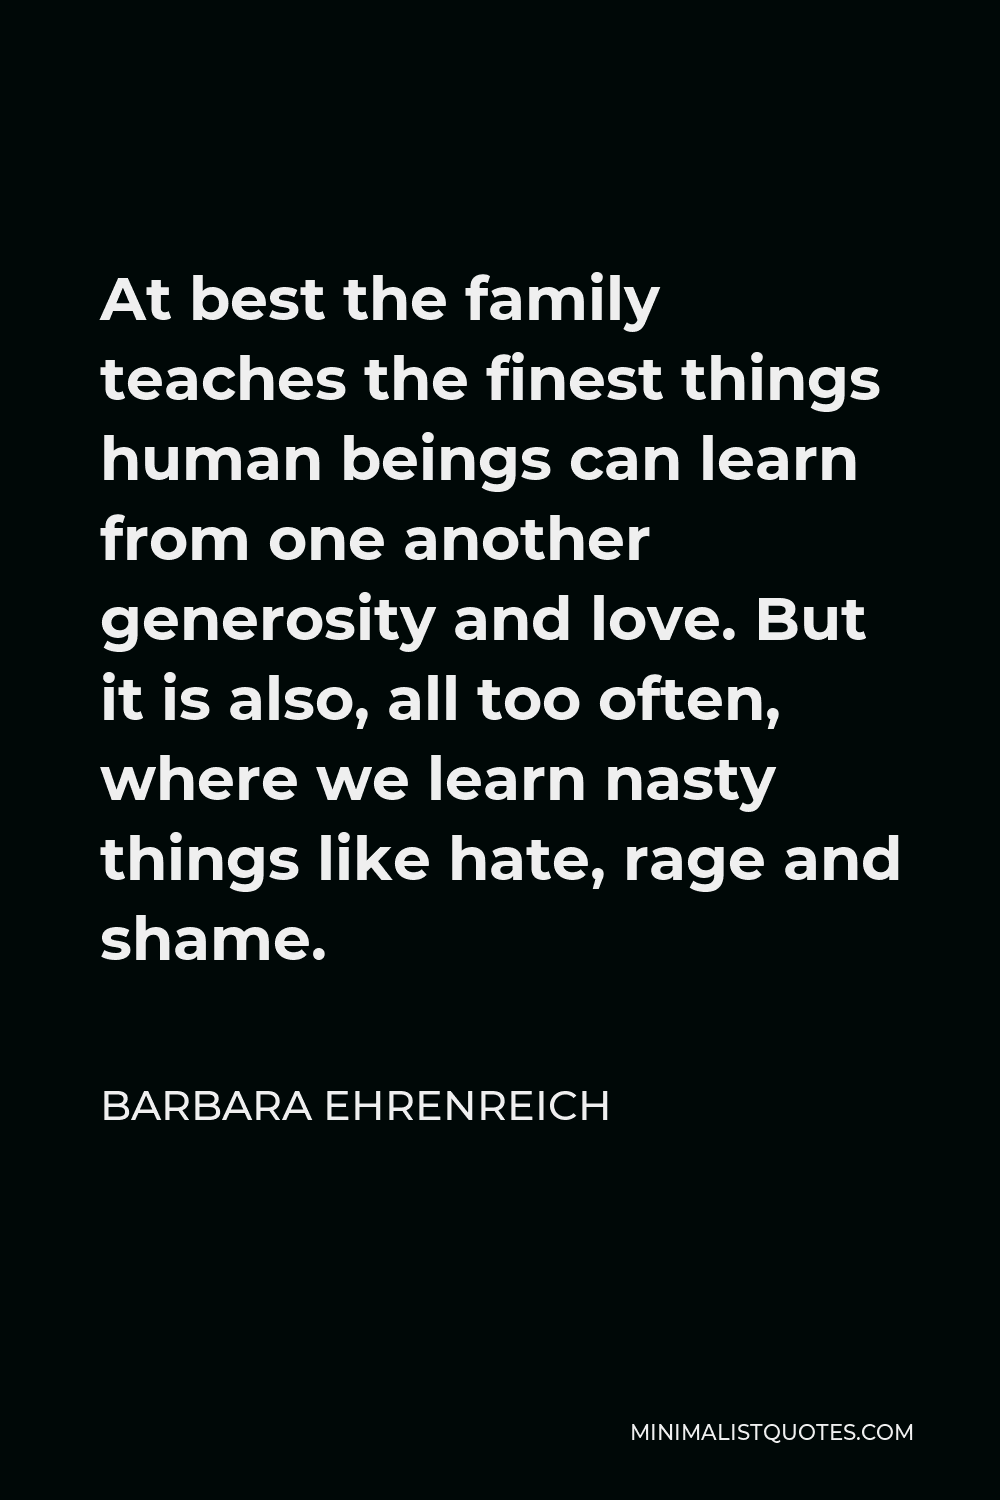 Barbara Ehrenreich Quote - At best the family teaches the finest things human beings can learn from one another generosity and love. But it is also, all too often, where we learn nasty things like hate, rage and shame.